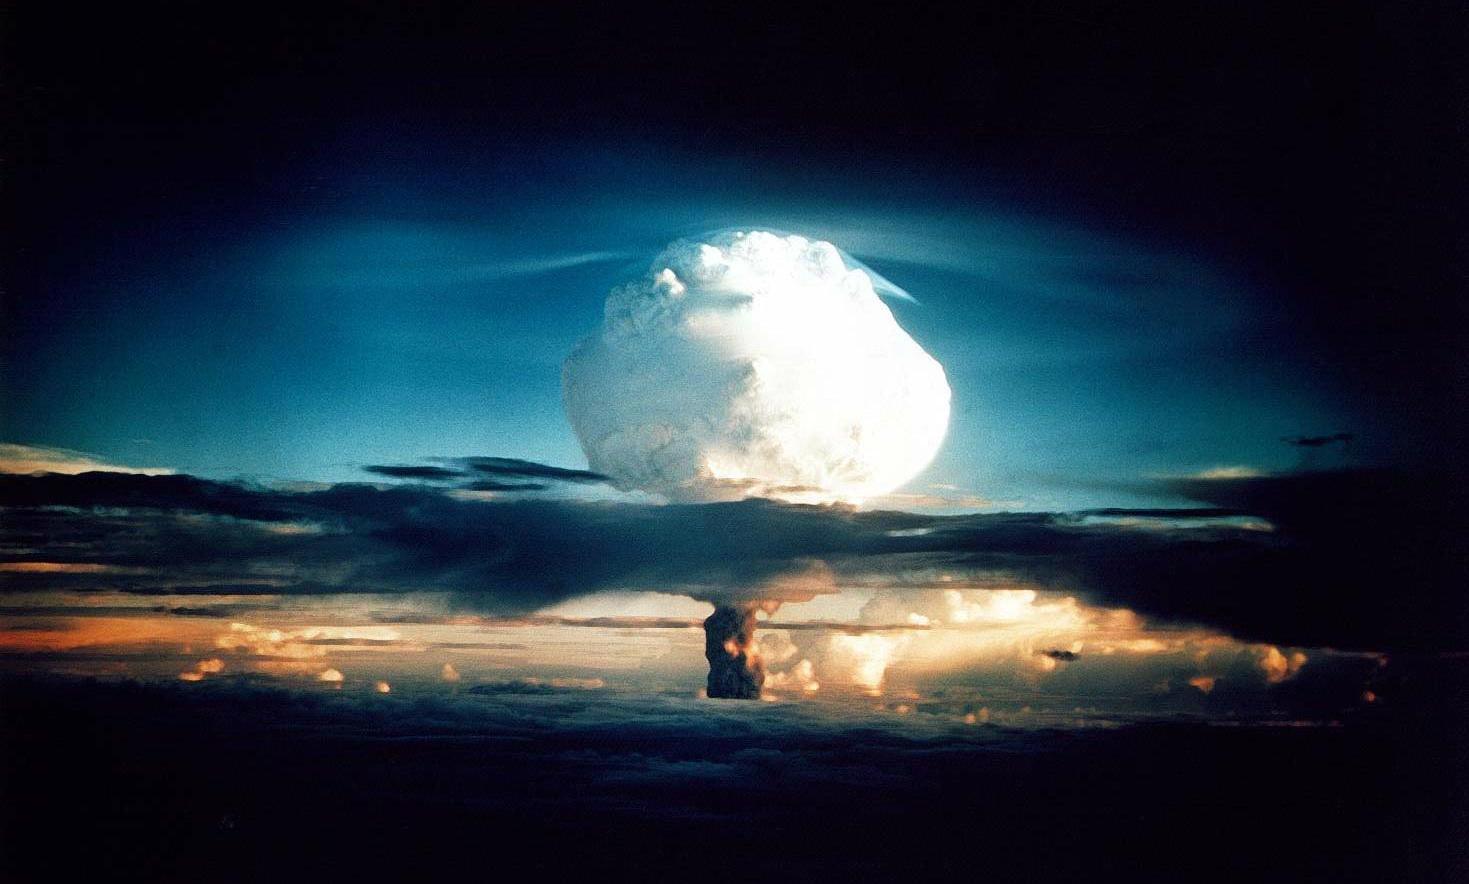 The US detonates "Mike," the first hydrogen bomb, on Nov. 1, 1952.